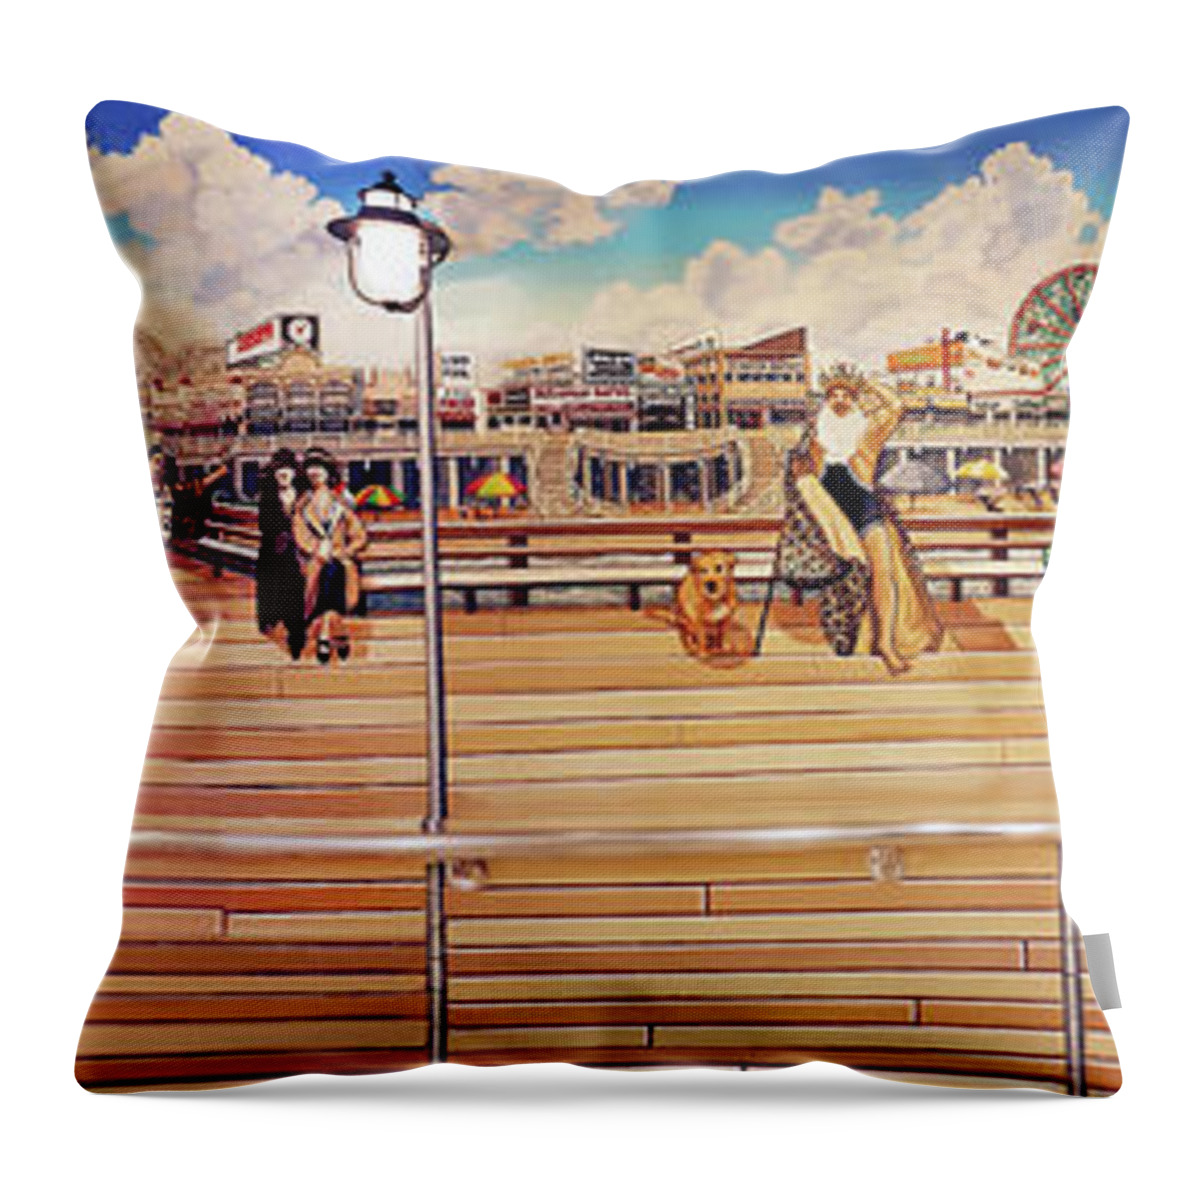  Throw Pillow featuring the painting Coney Island Boardwalk by Bonnie Siracusa